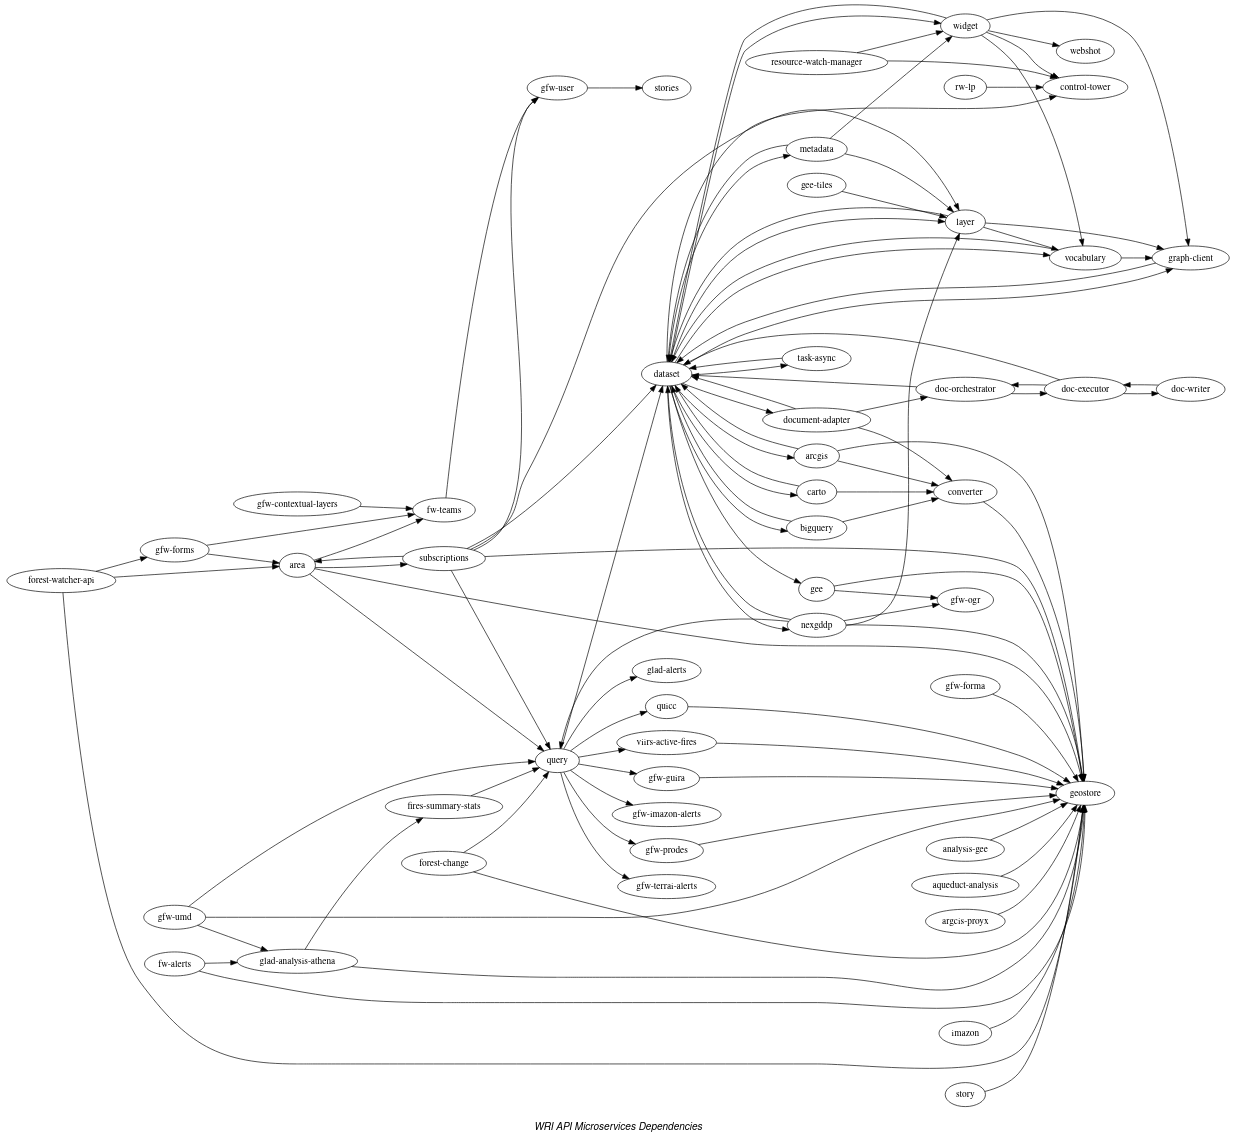 Microservice dependency graph